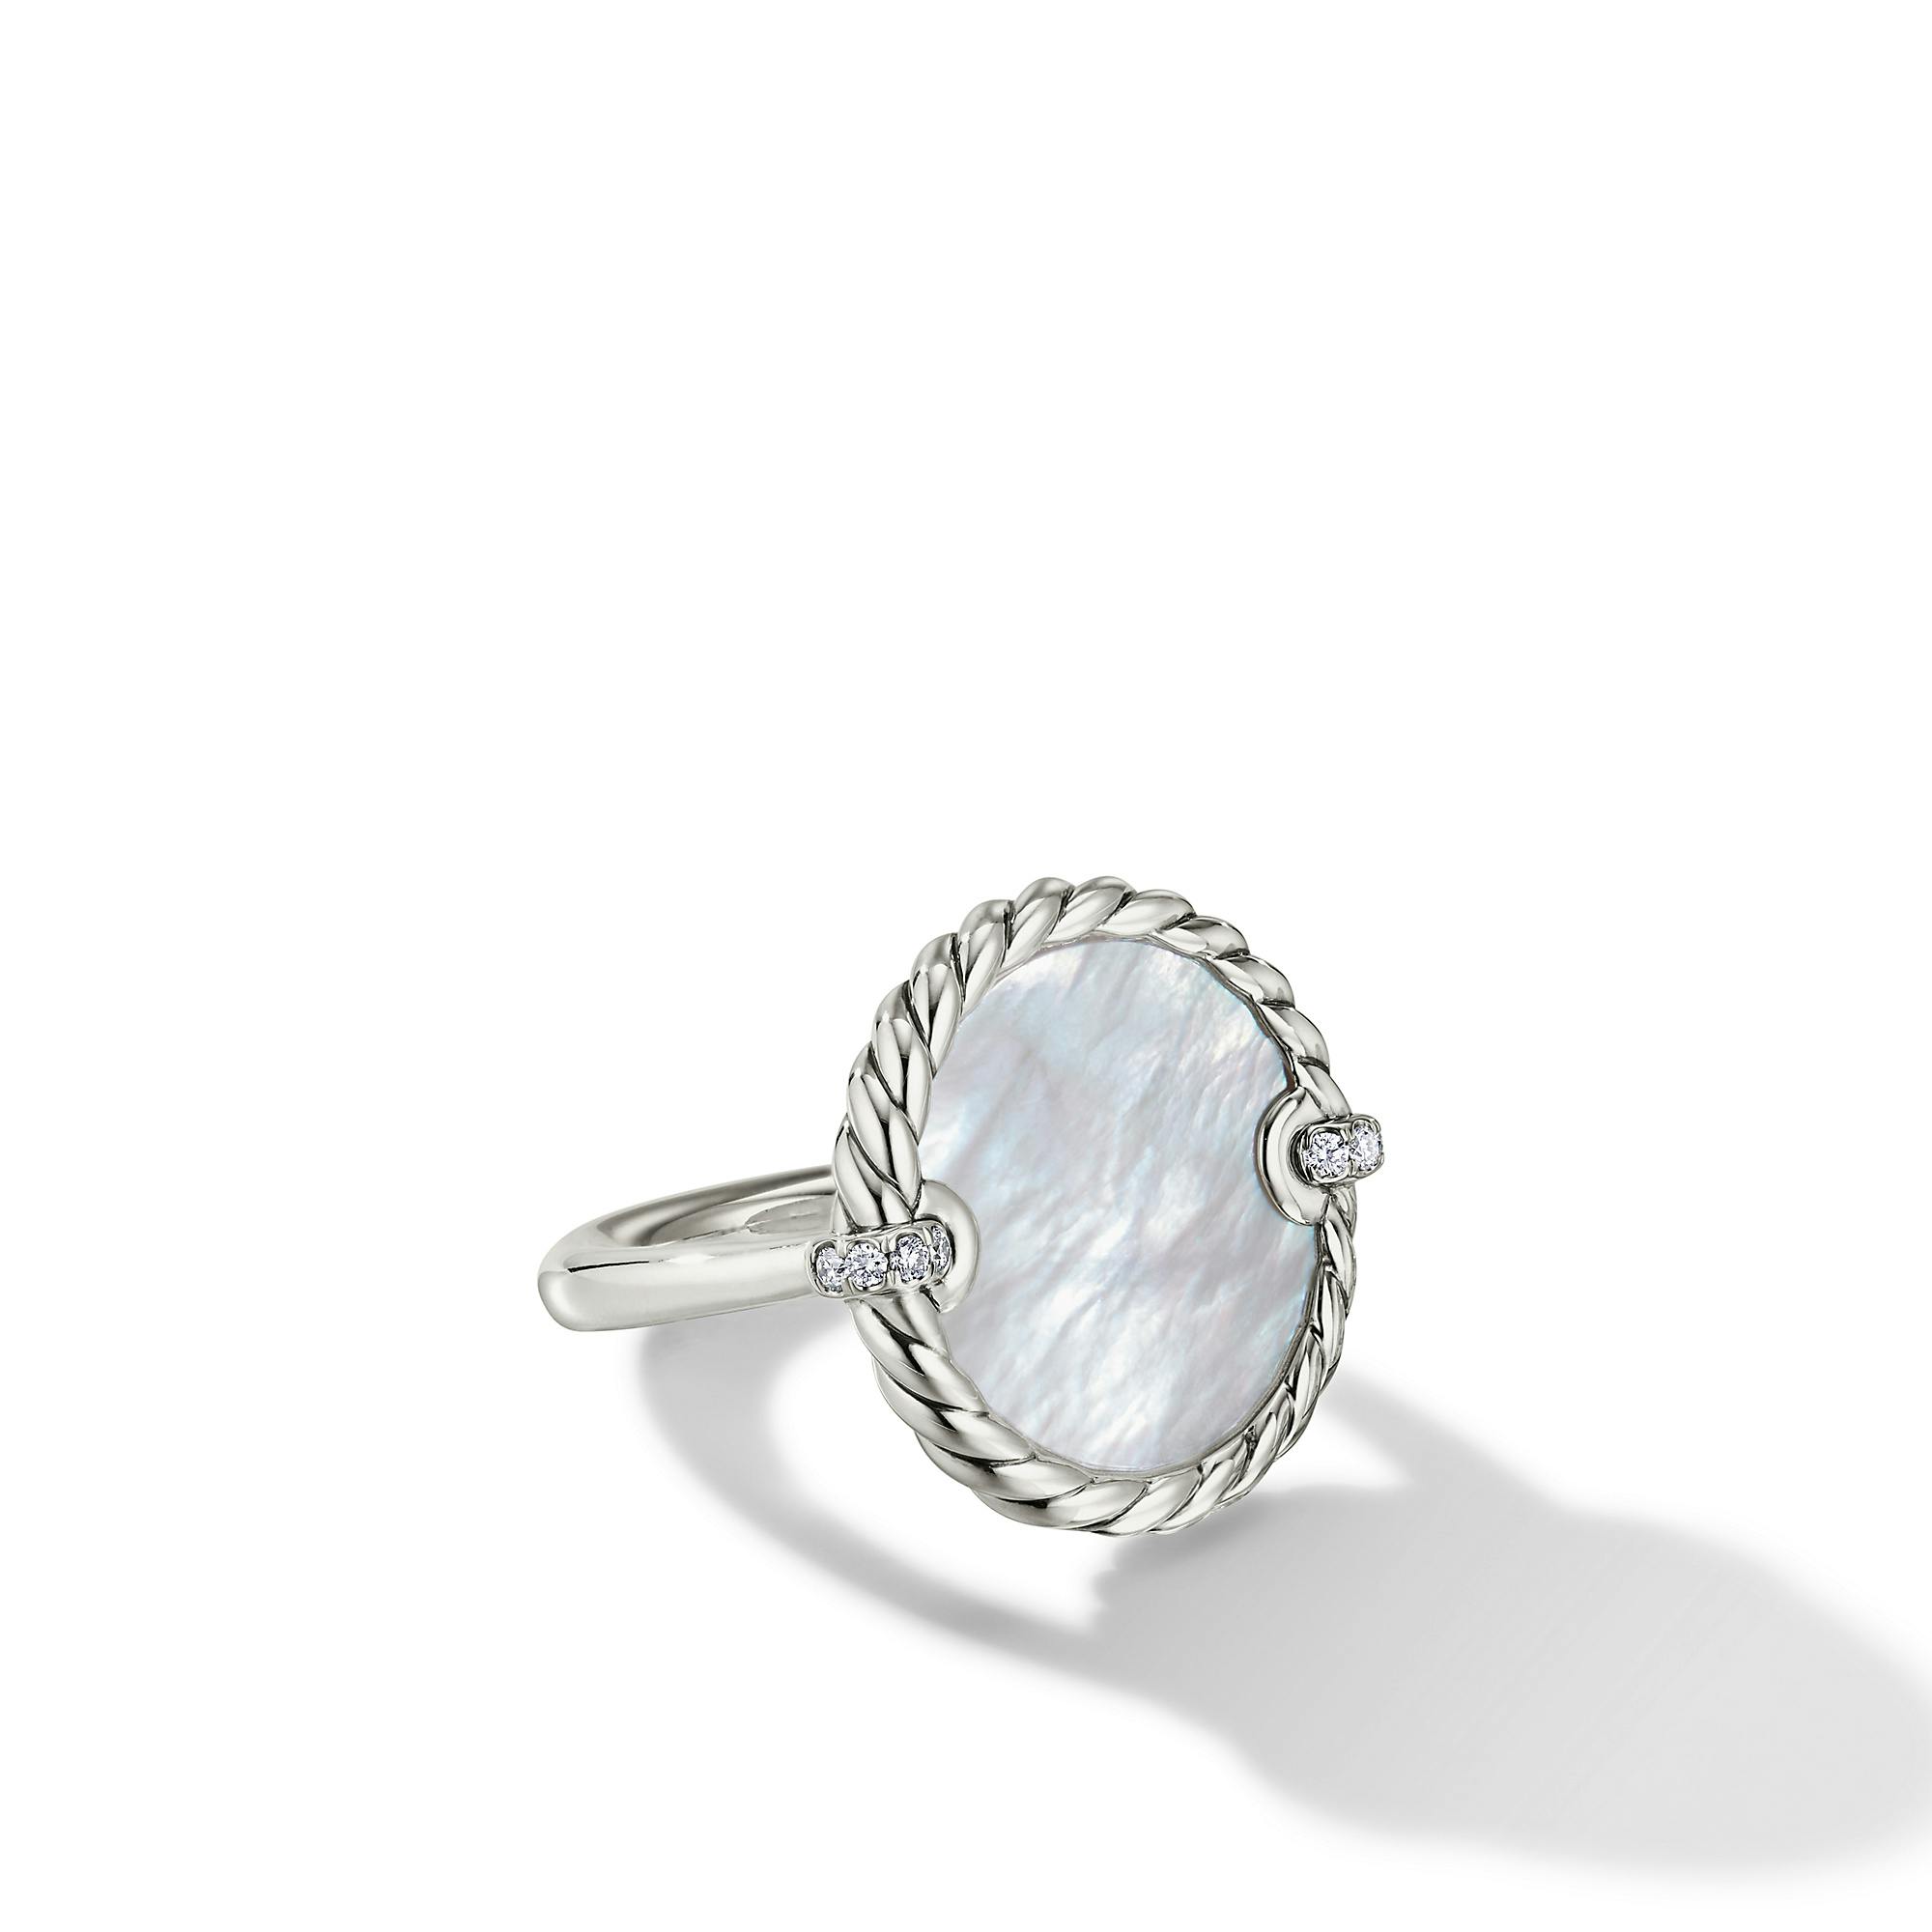 David Yurman DY Elements Ring with Mother of Pearl and Pave Diamonds